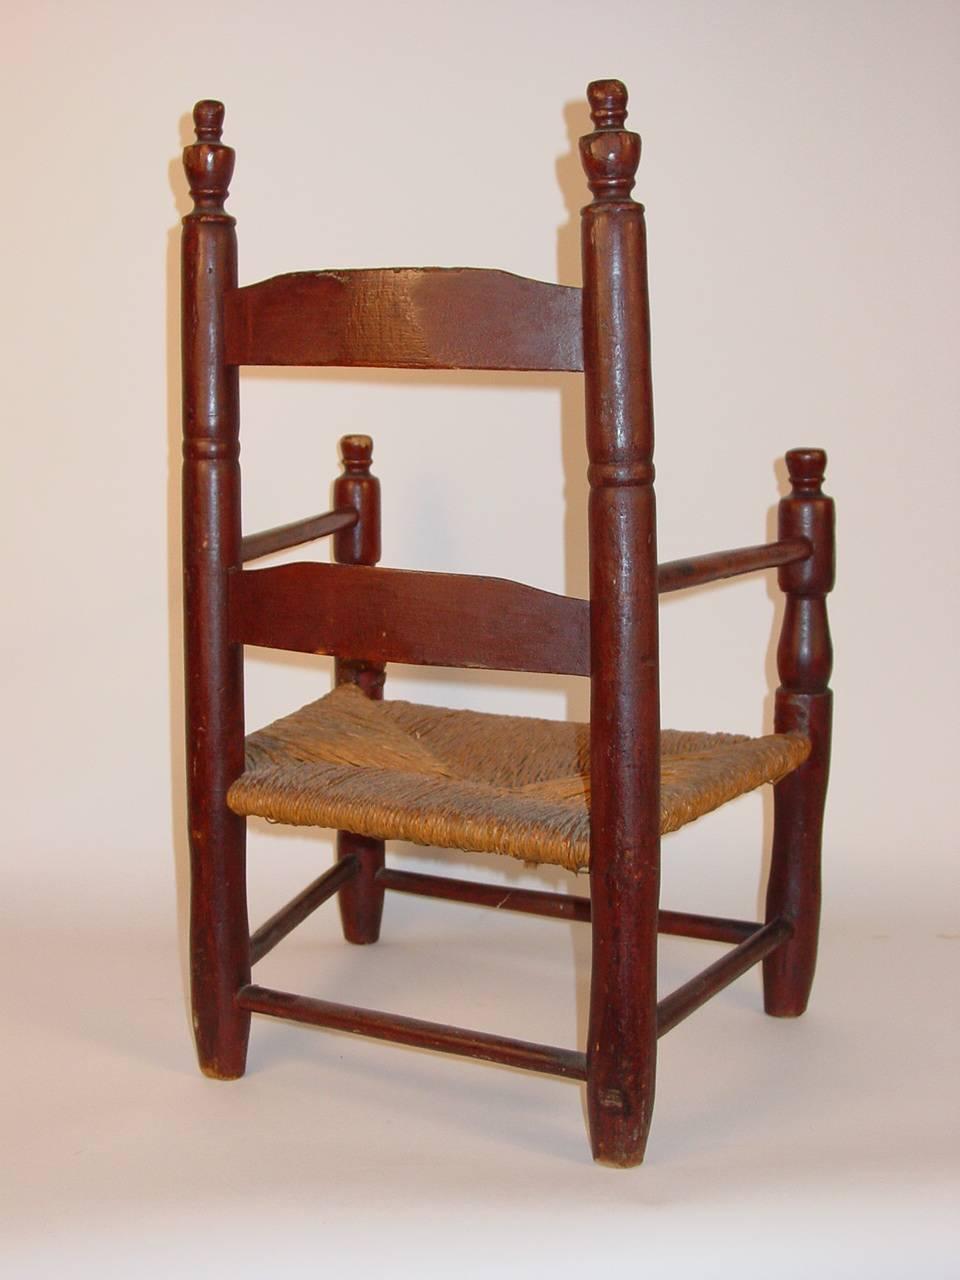 A child's ladder-back armchair
Bergen County, New Jersey, circa 1800.
Maple with an original red-painted finish. The rush seat possibly original
Measure: Ht. 23